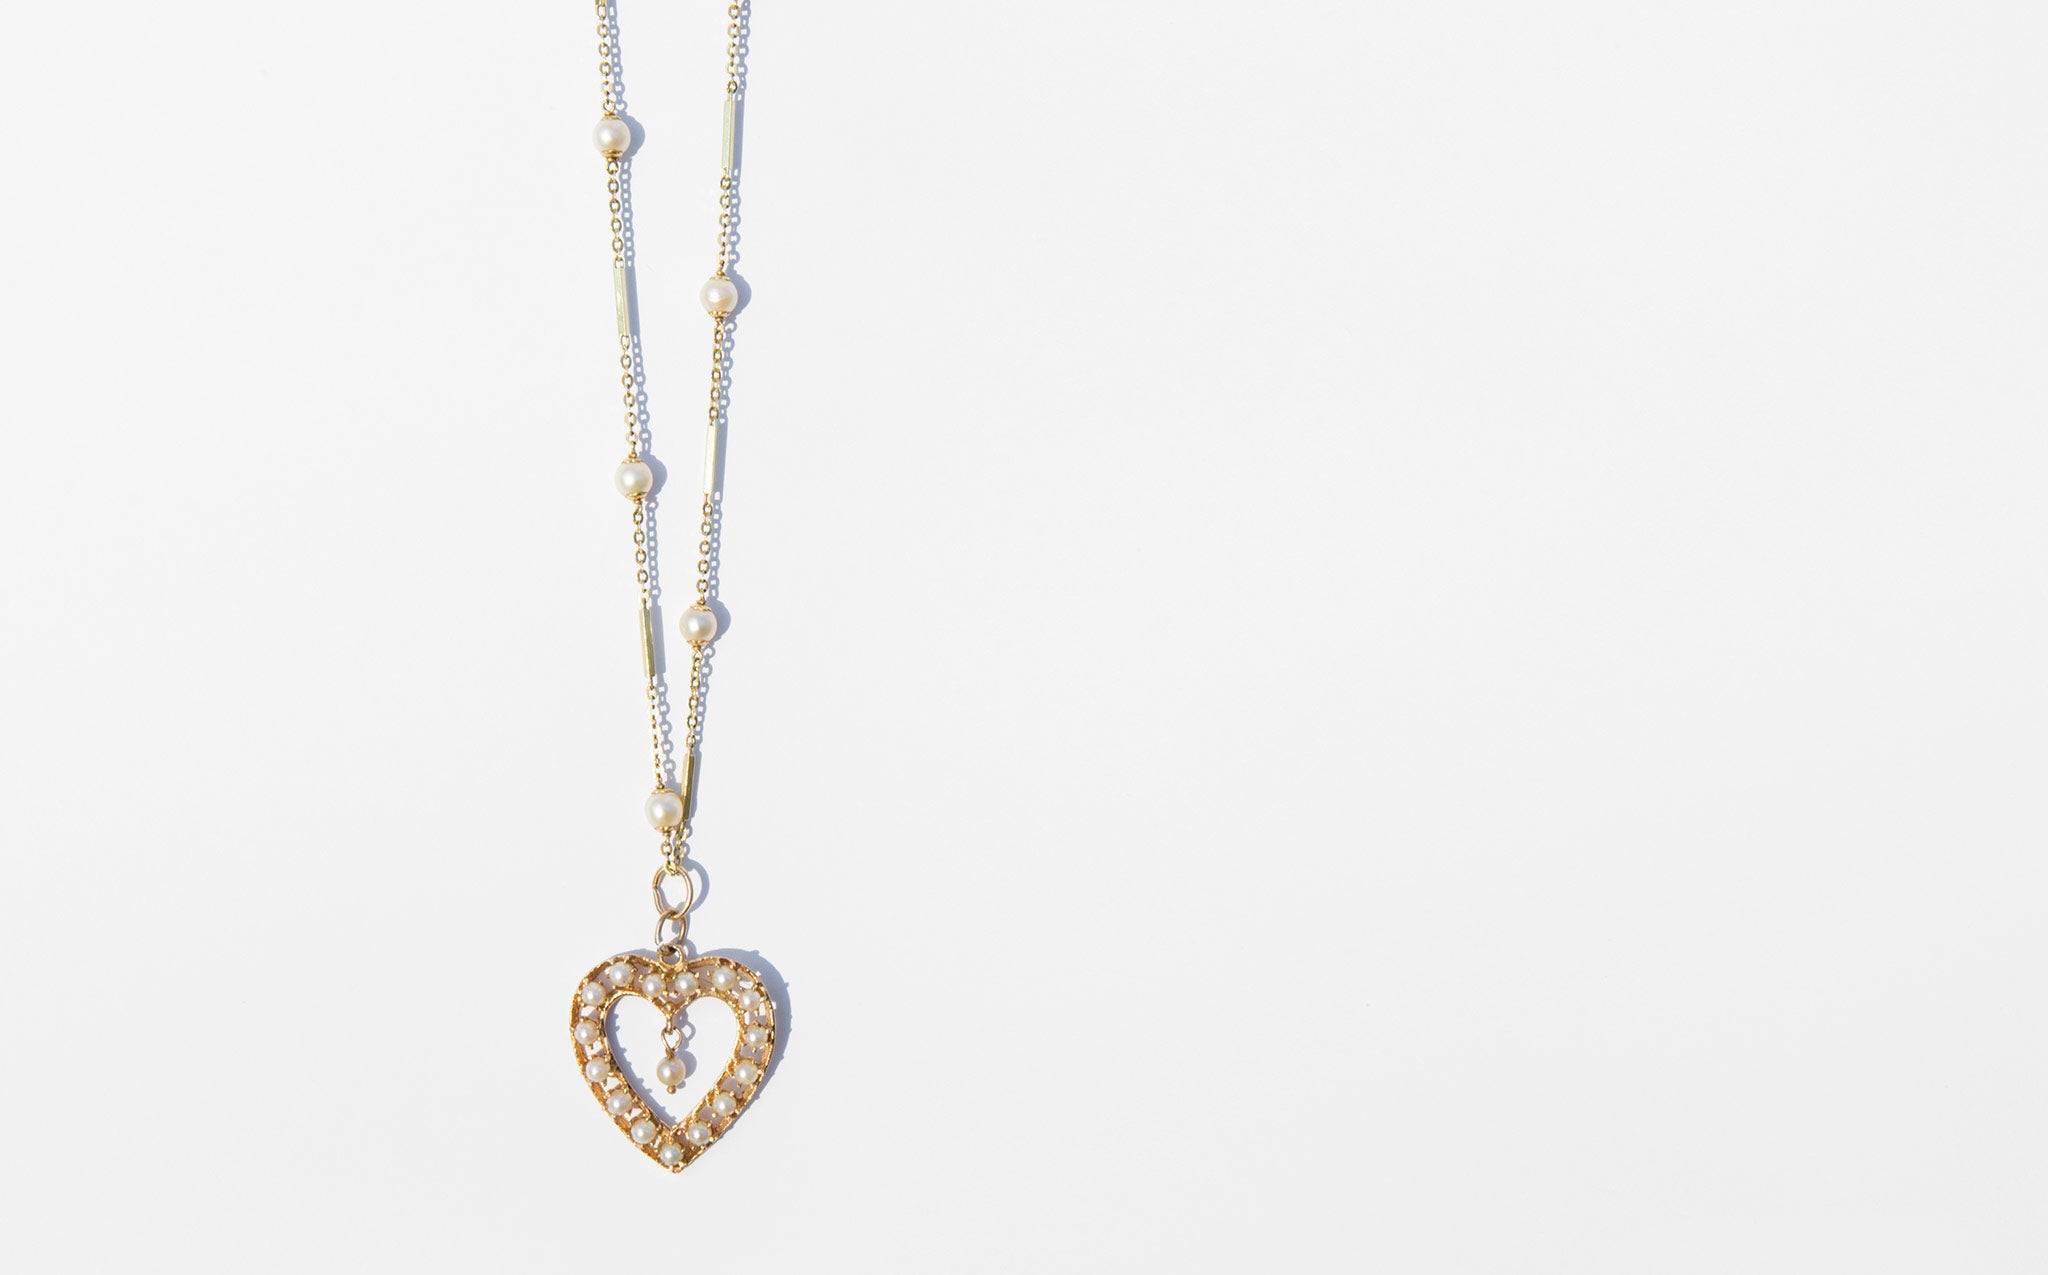 Bared Heart Necklace